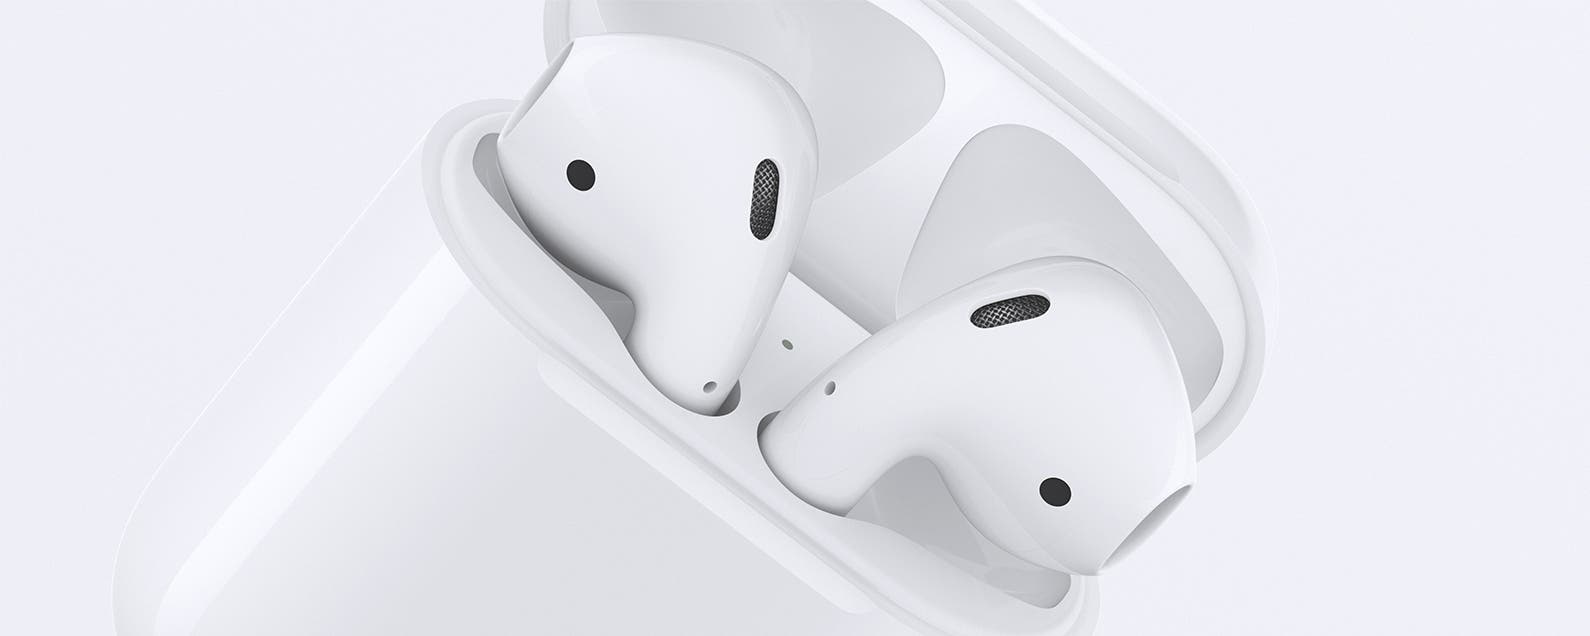 Apple AirPods Guide: To Connect, Set Up, Charge & Use Controls